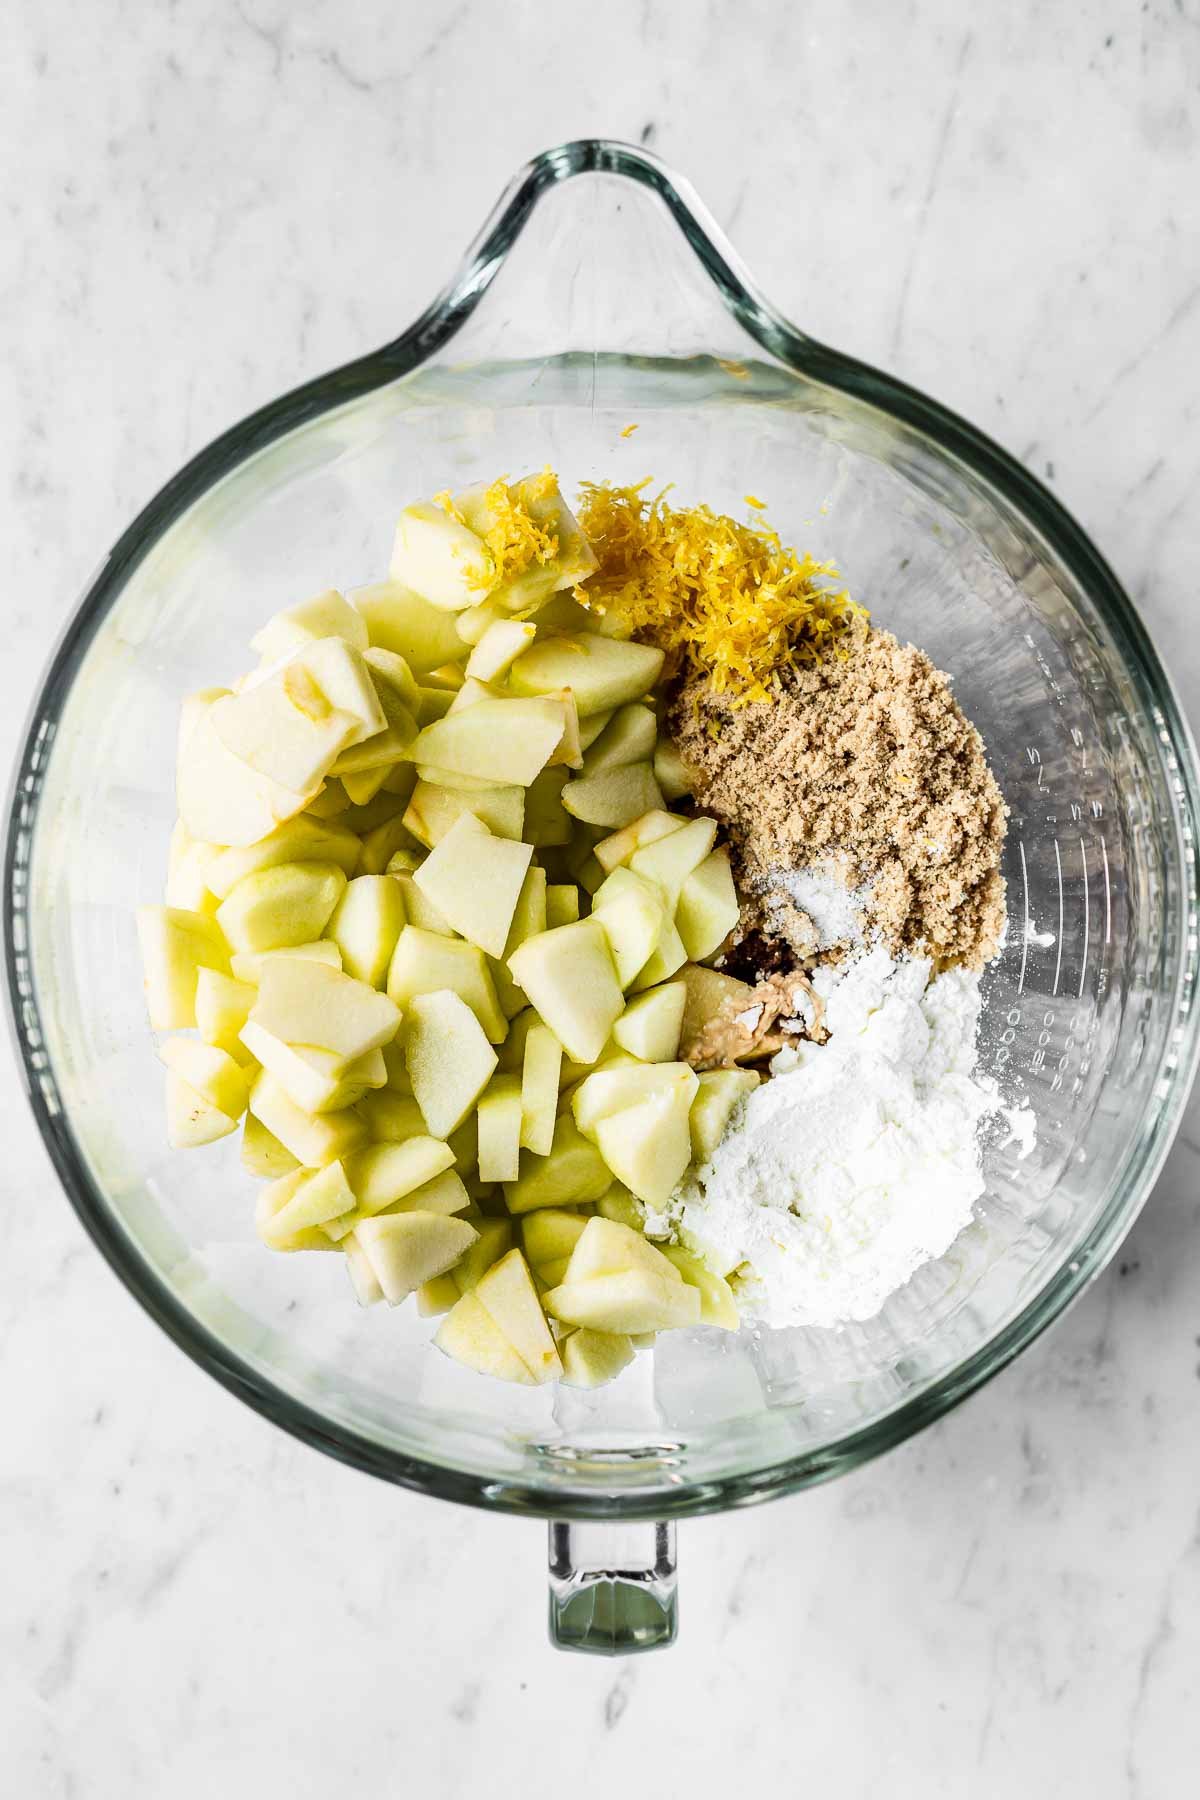 A large glass mixing bowl filled with apples, lemon zest, brown sugar and cornstarch for a fruit crisp.